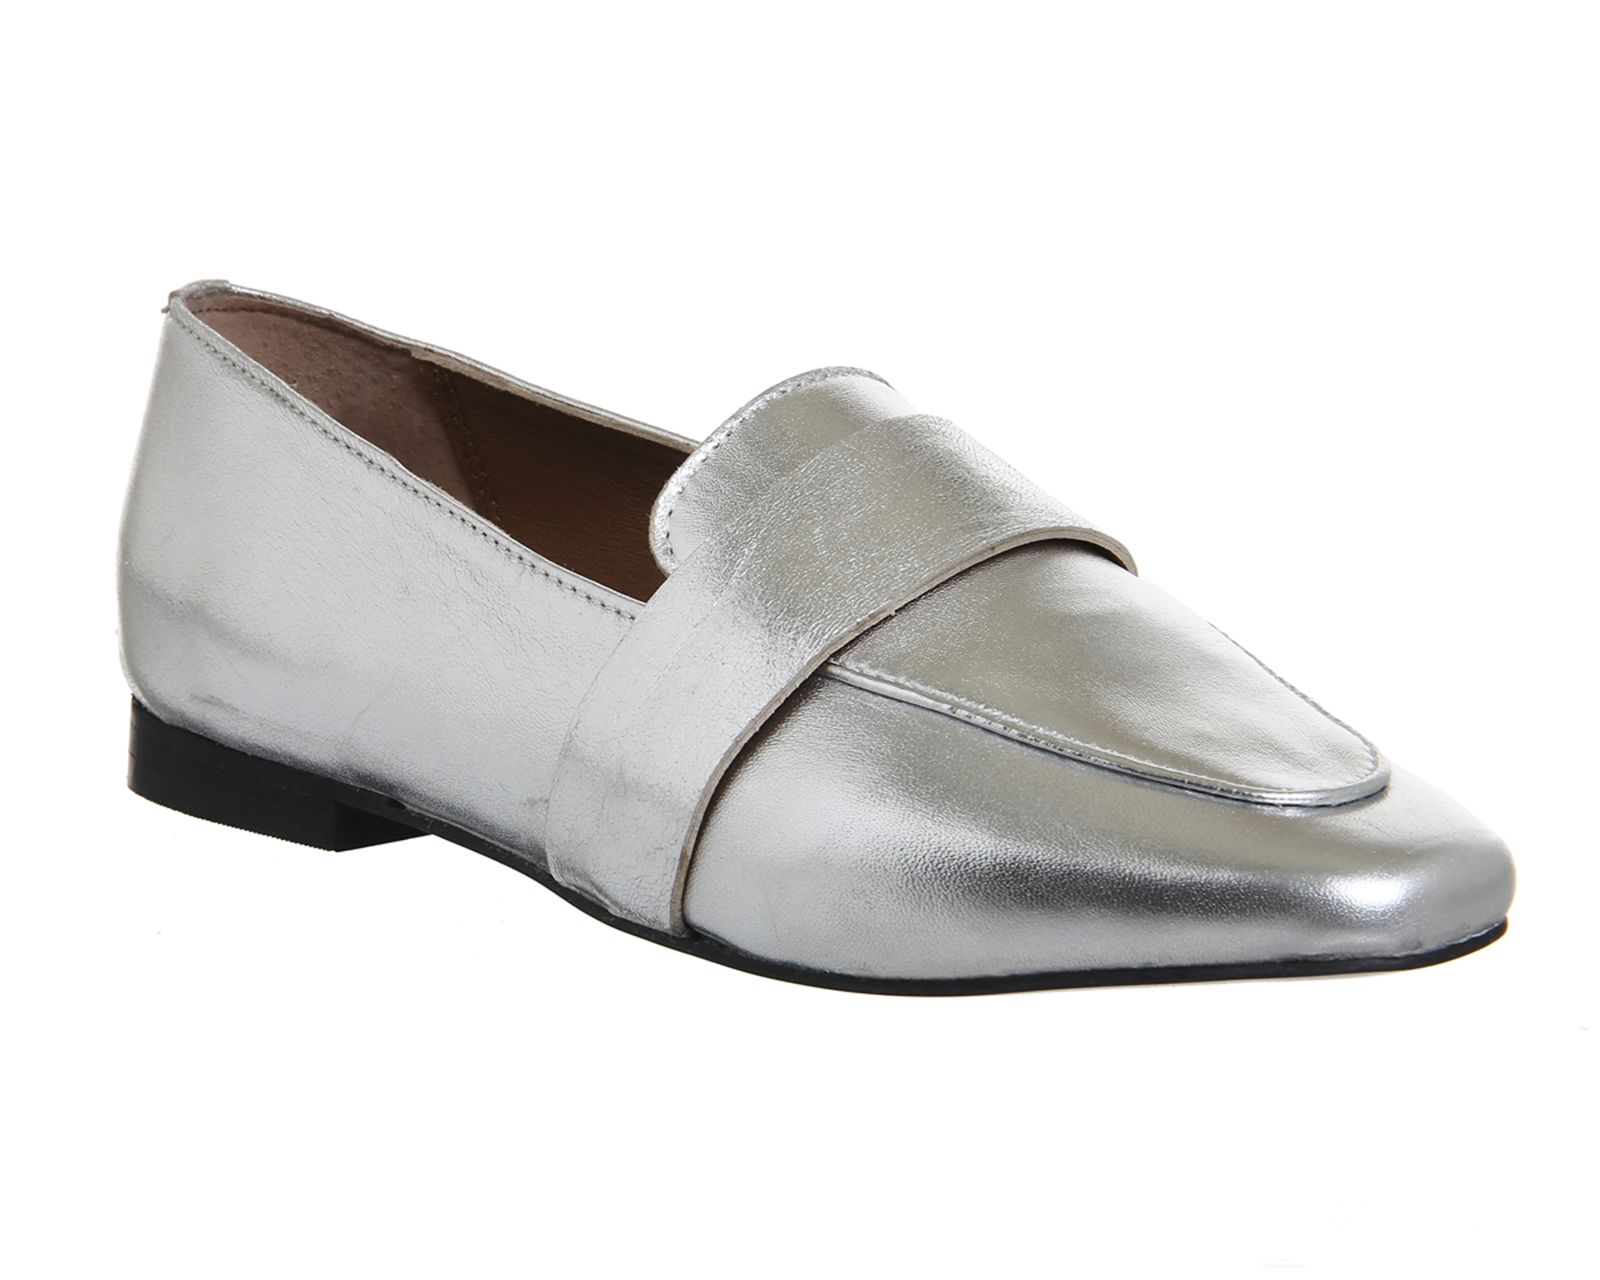 OFFICEPip Clean LoafersSilver Metallic Leather